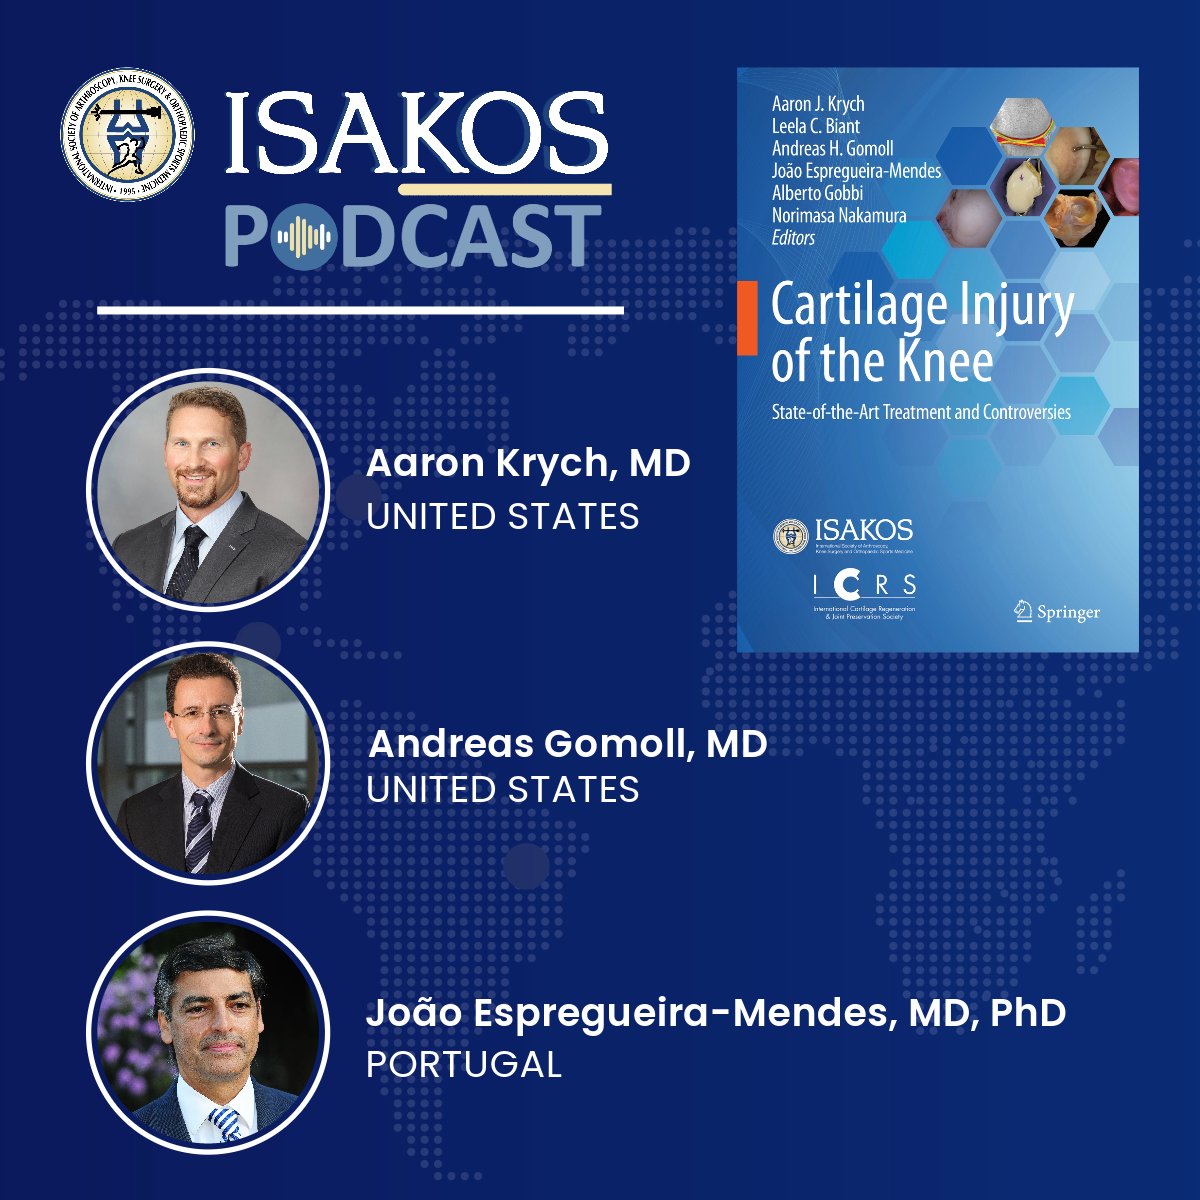 NEW! #ISAKOS Book Talk: Cartilage Injury of the Knee: State-of-the-Art Treatment and Controversies LISTEN: anchor.fm/isakos READ: isakos.com/Publications/B… @CartilageRepair @CEspregueira @DrKrych